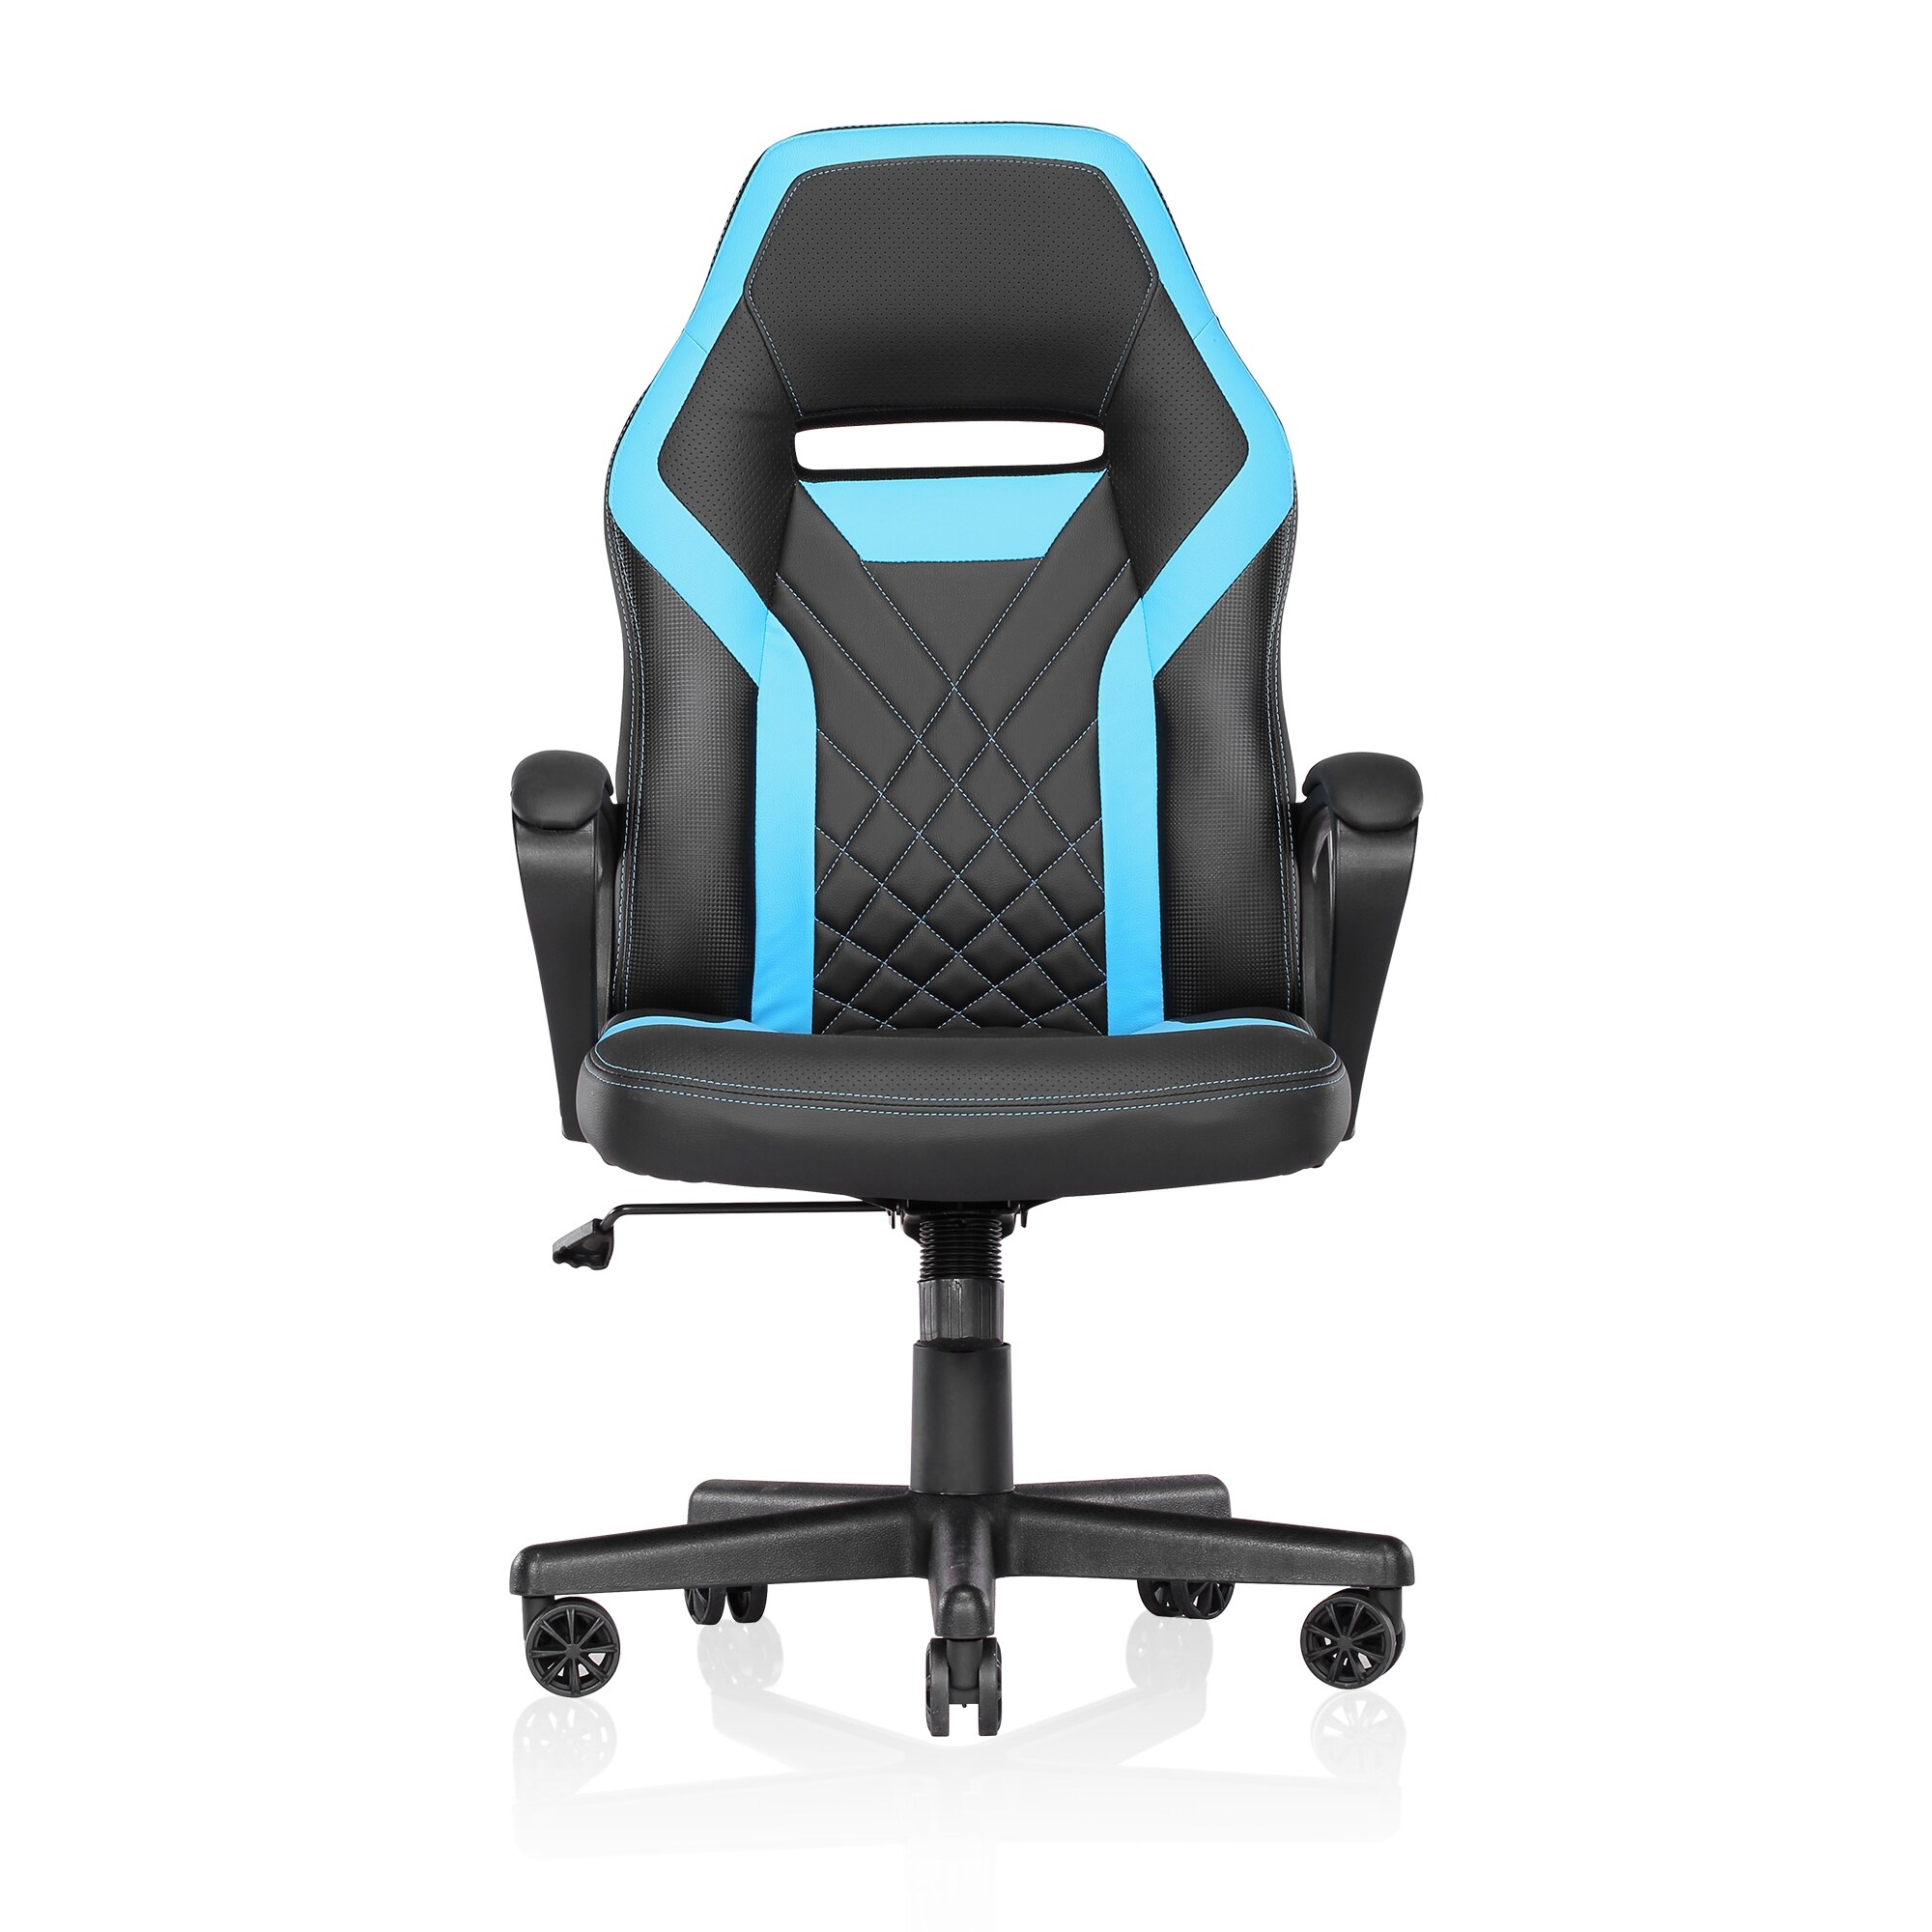 https://ak1.ostkcdn.com/images/products/is/images/direct/7df319697a042dba97148edb1100ad69854c28e8/Eureka-Ergonomic-PU-Leather-Gaming-Chair-Home-Office-Computer-Chair-with-Hearest%2C-Lumbar-Support.jpg